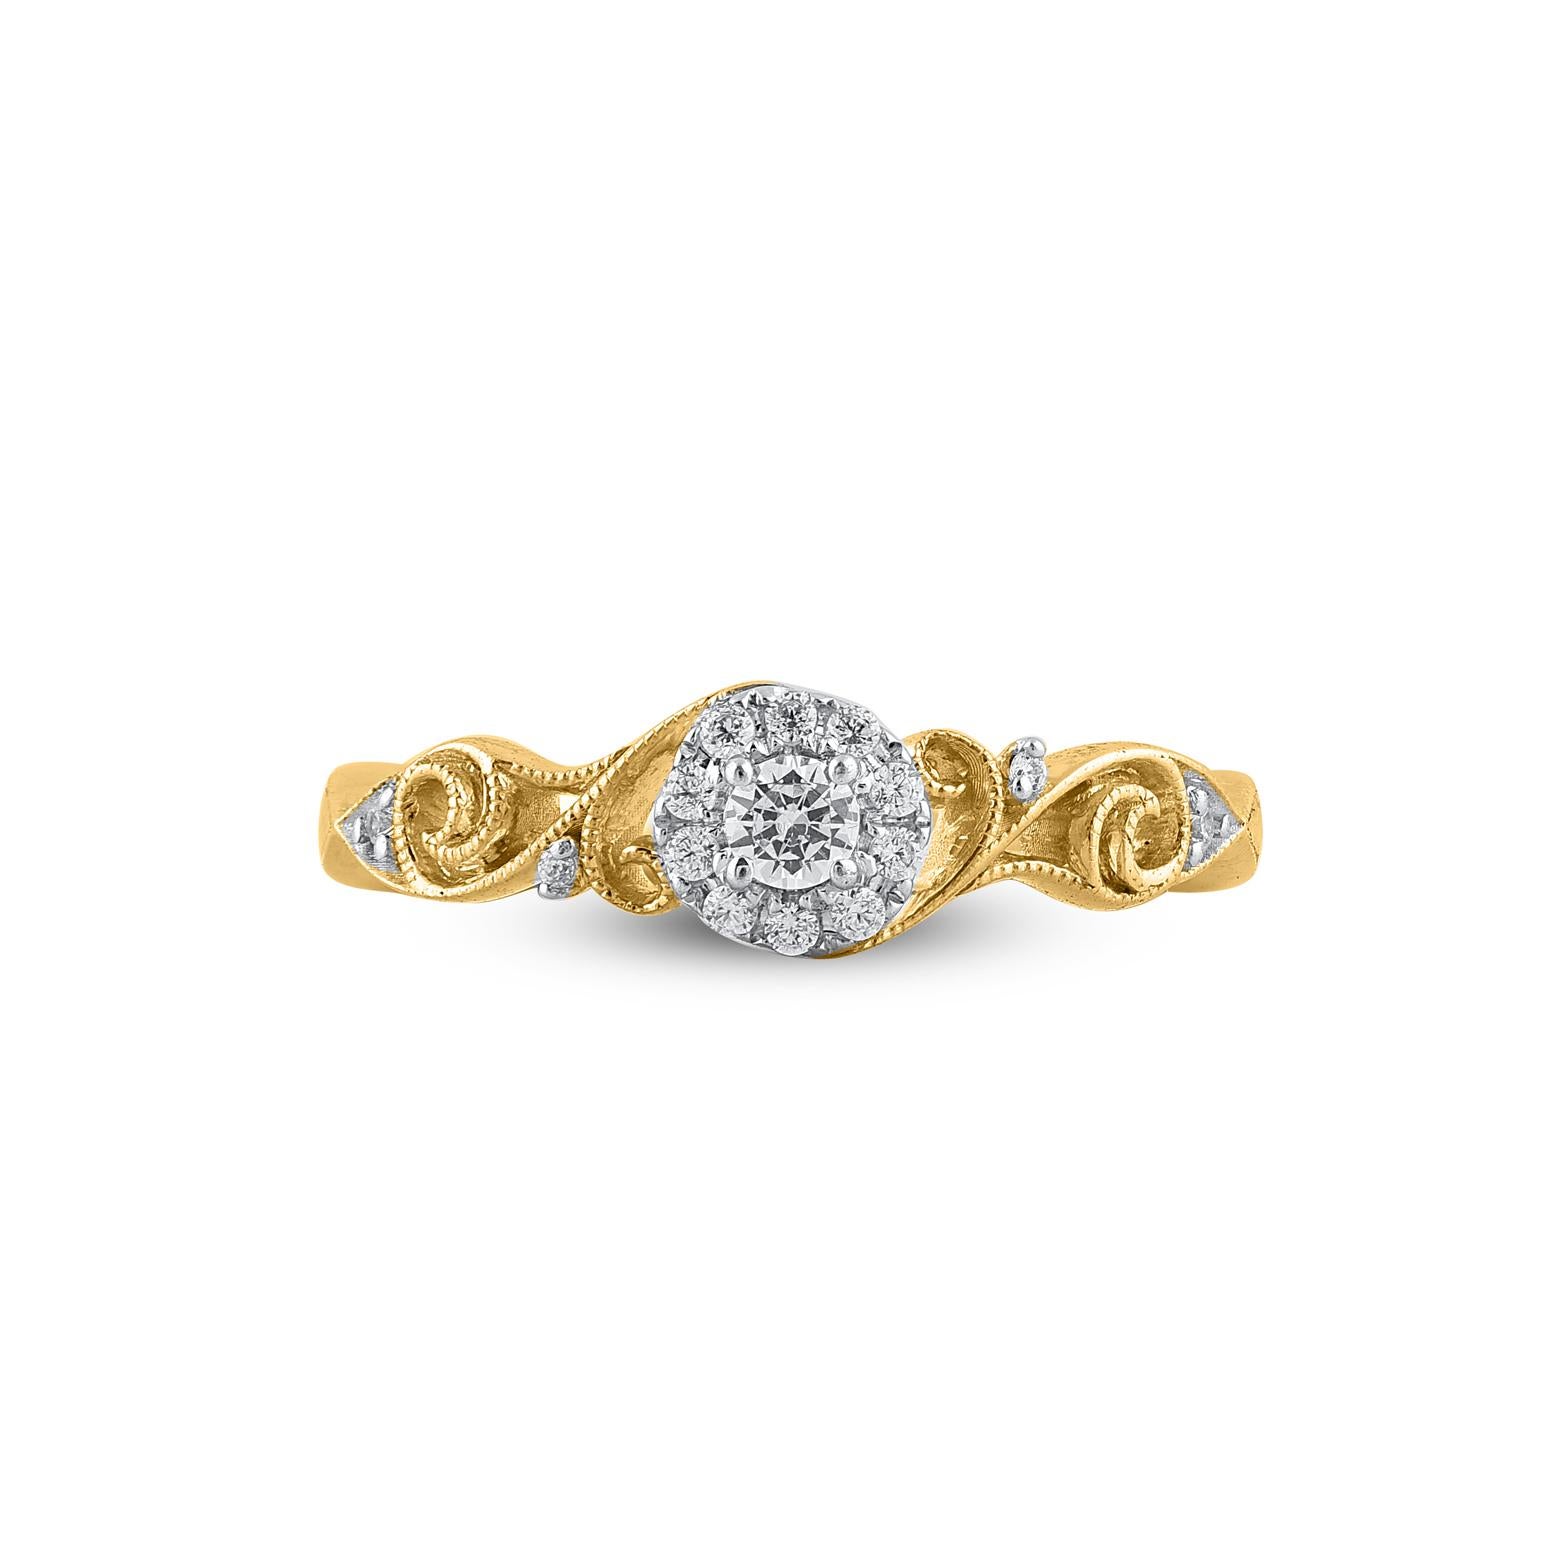 Win her heart with this classic and elegant diamond wedding ring. These diamond ring is studded with 15 brilliant cut round diamonds in prong setting and crafted in 14kt yellow gold. The white diamonds are graded as H-I color and I2 clarity and a